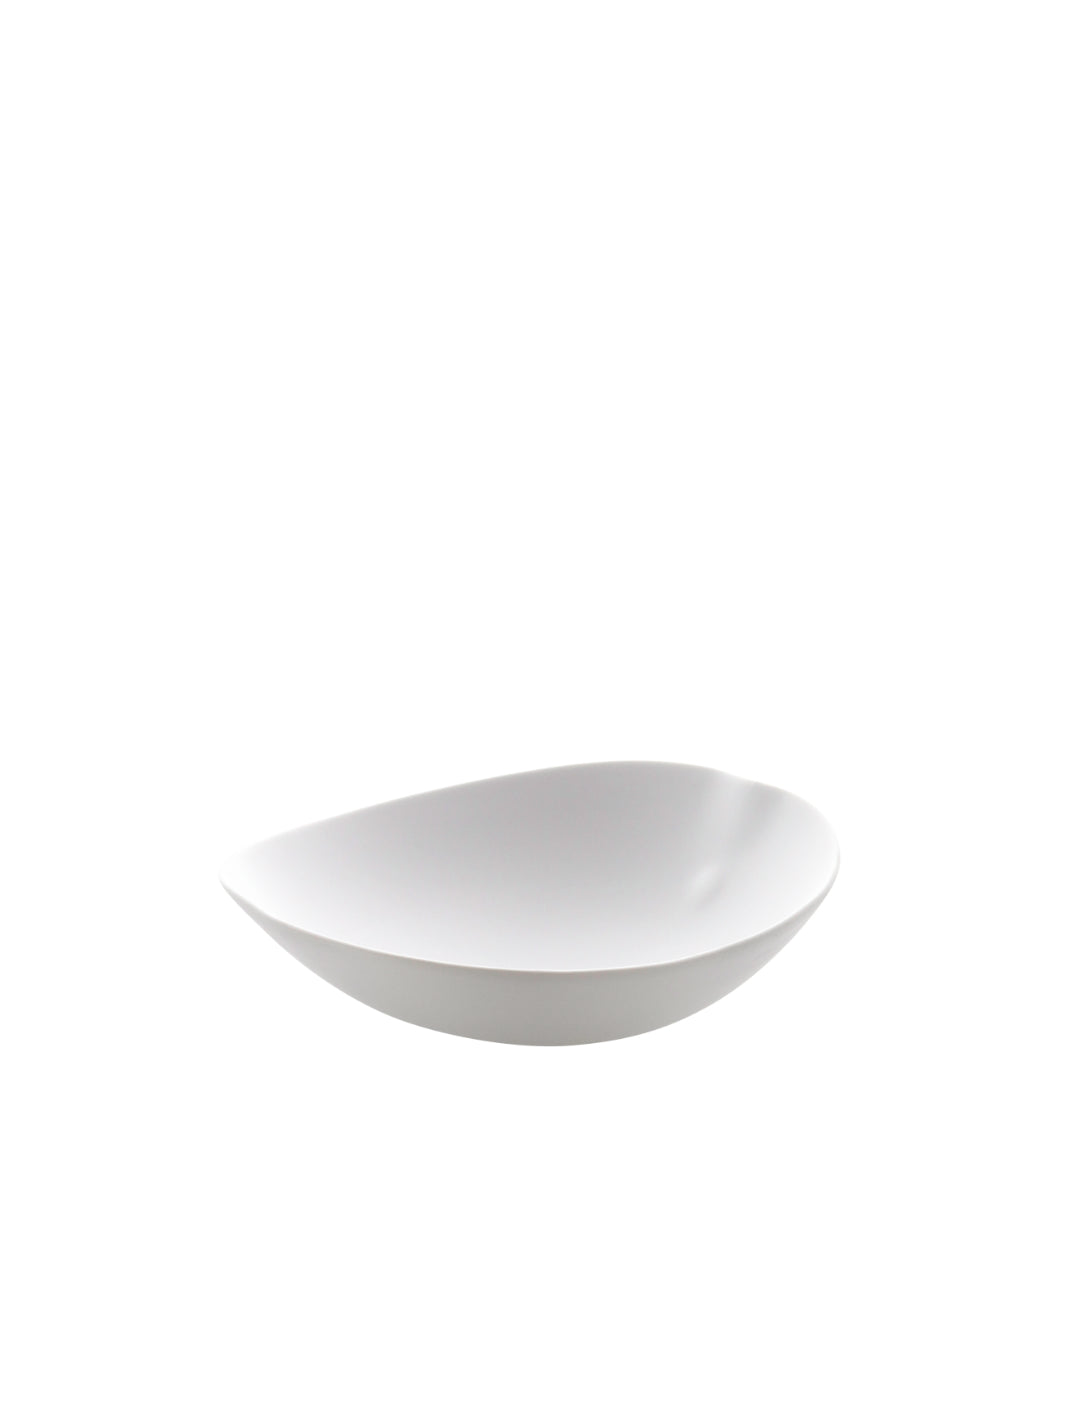 COOKPLAY Shell Salad Bowl (22x21.5cm/8.7x8.5in)